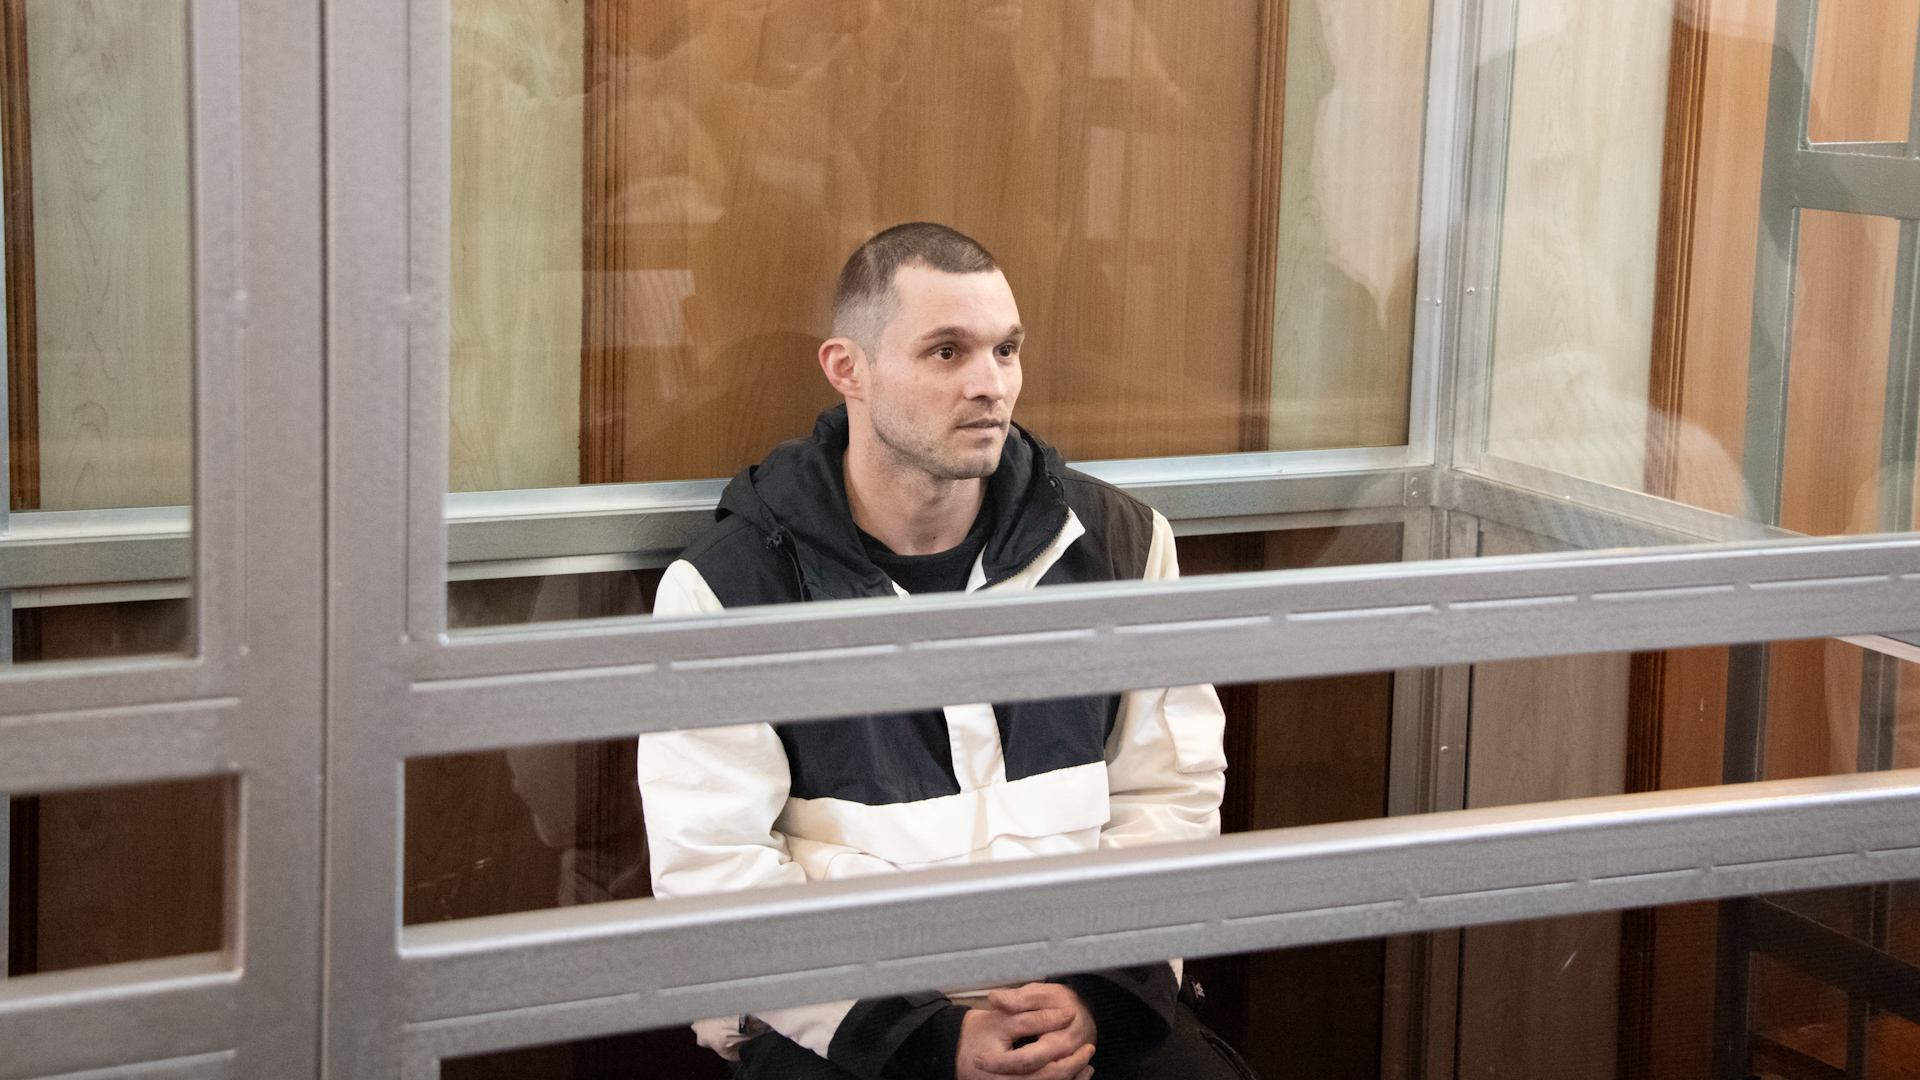 U.S. soldier Gordon Black sentenced to nearly four years in Russian penal colony for theft, amid tensions over wrongful detentions.